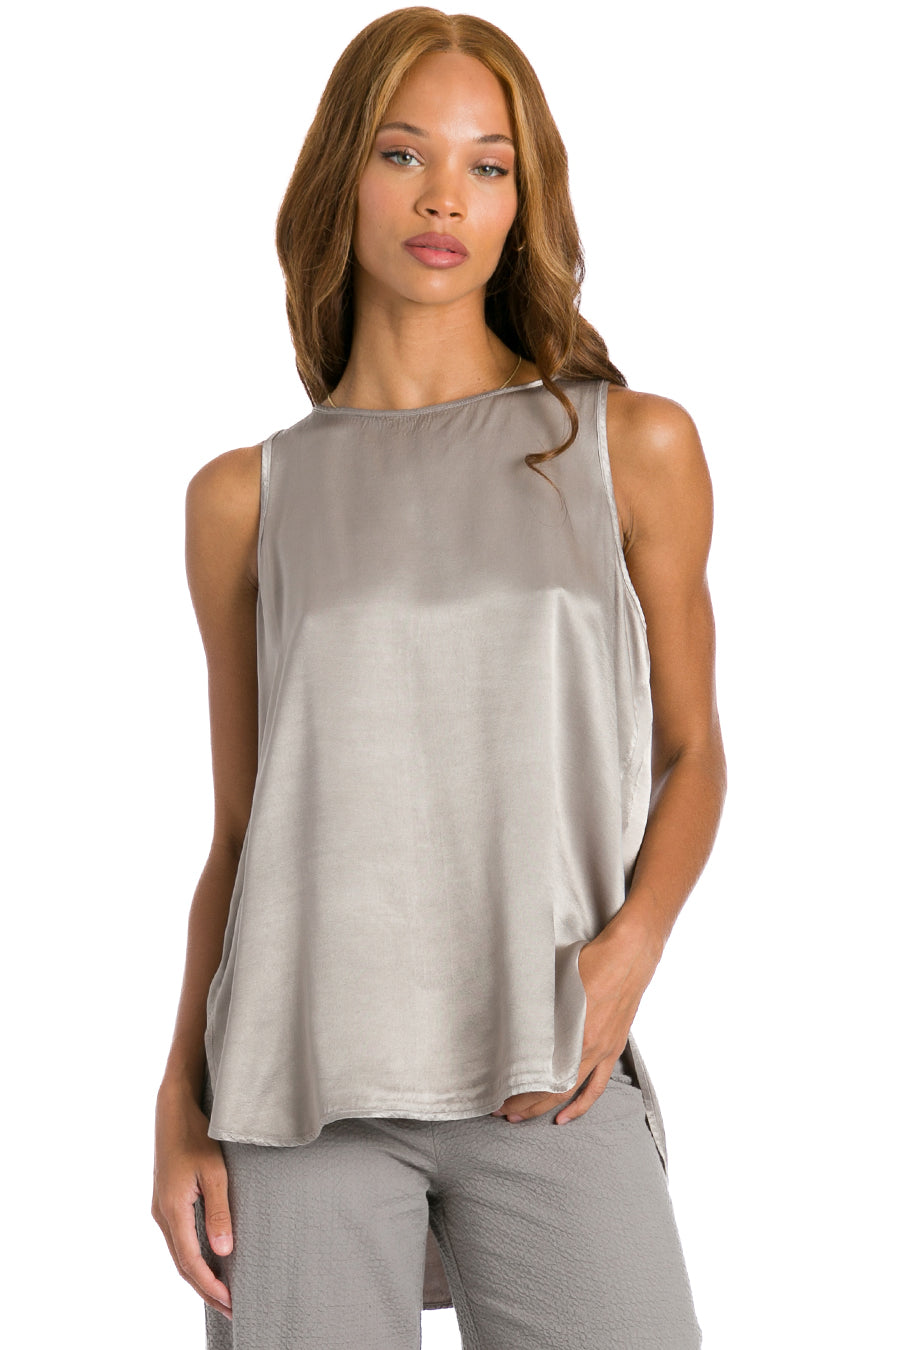 Hard Tail Forever Deep Double V Workout Tank Top - Heather Gray - M - 2024  ❤️ CooperativaShop ✓